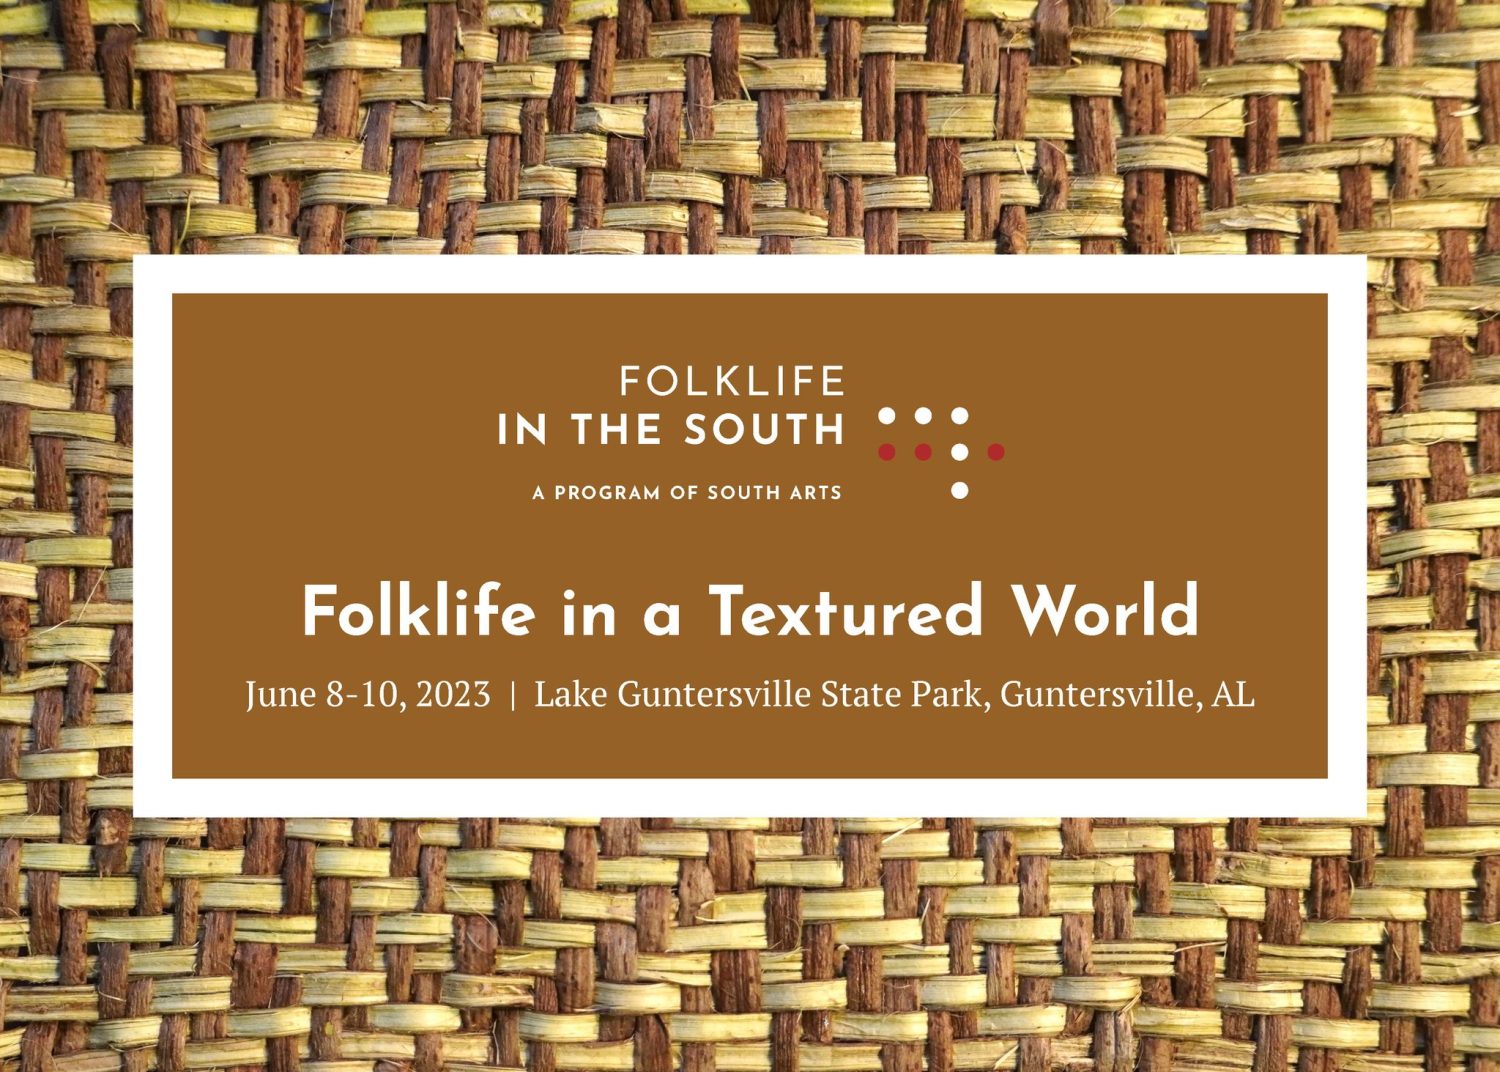 folklorists in the south full graphic, which is a brown weave background with event details in brown and white